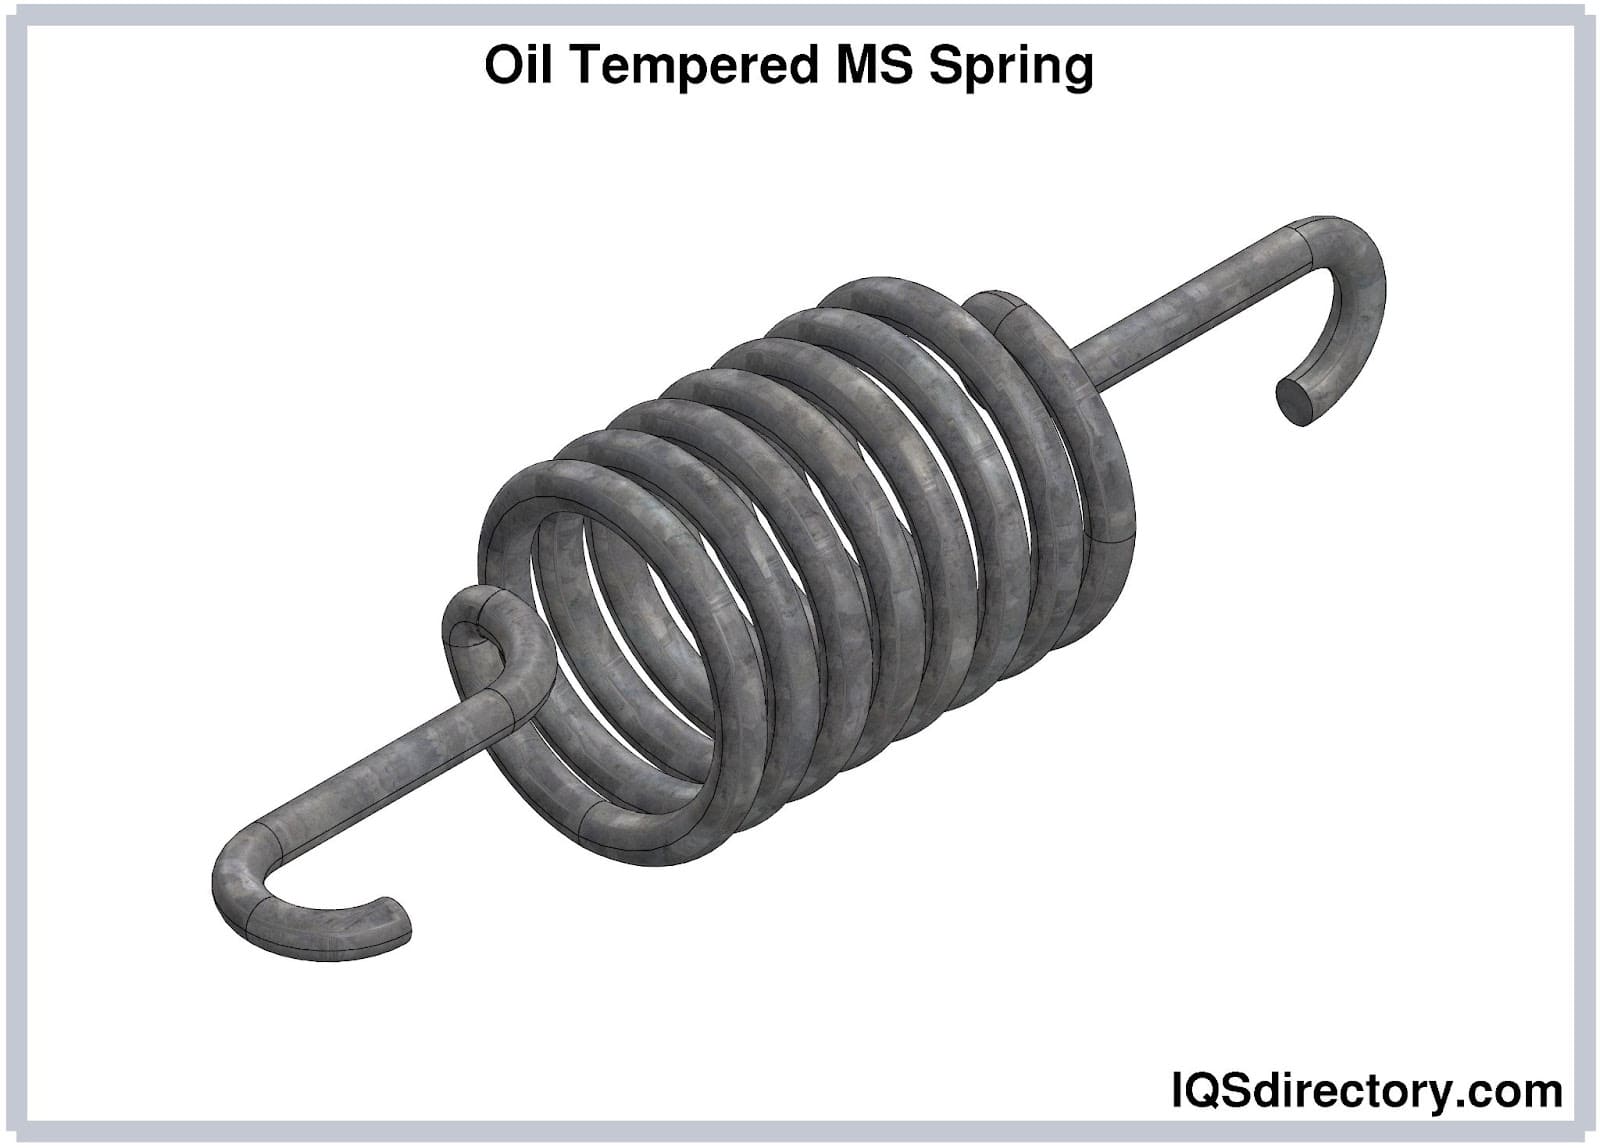 Oil Tempered MS Spring